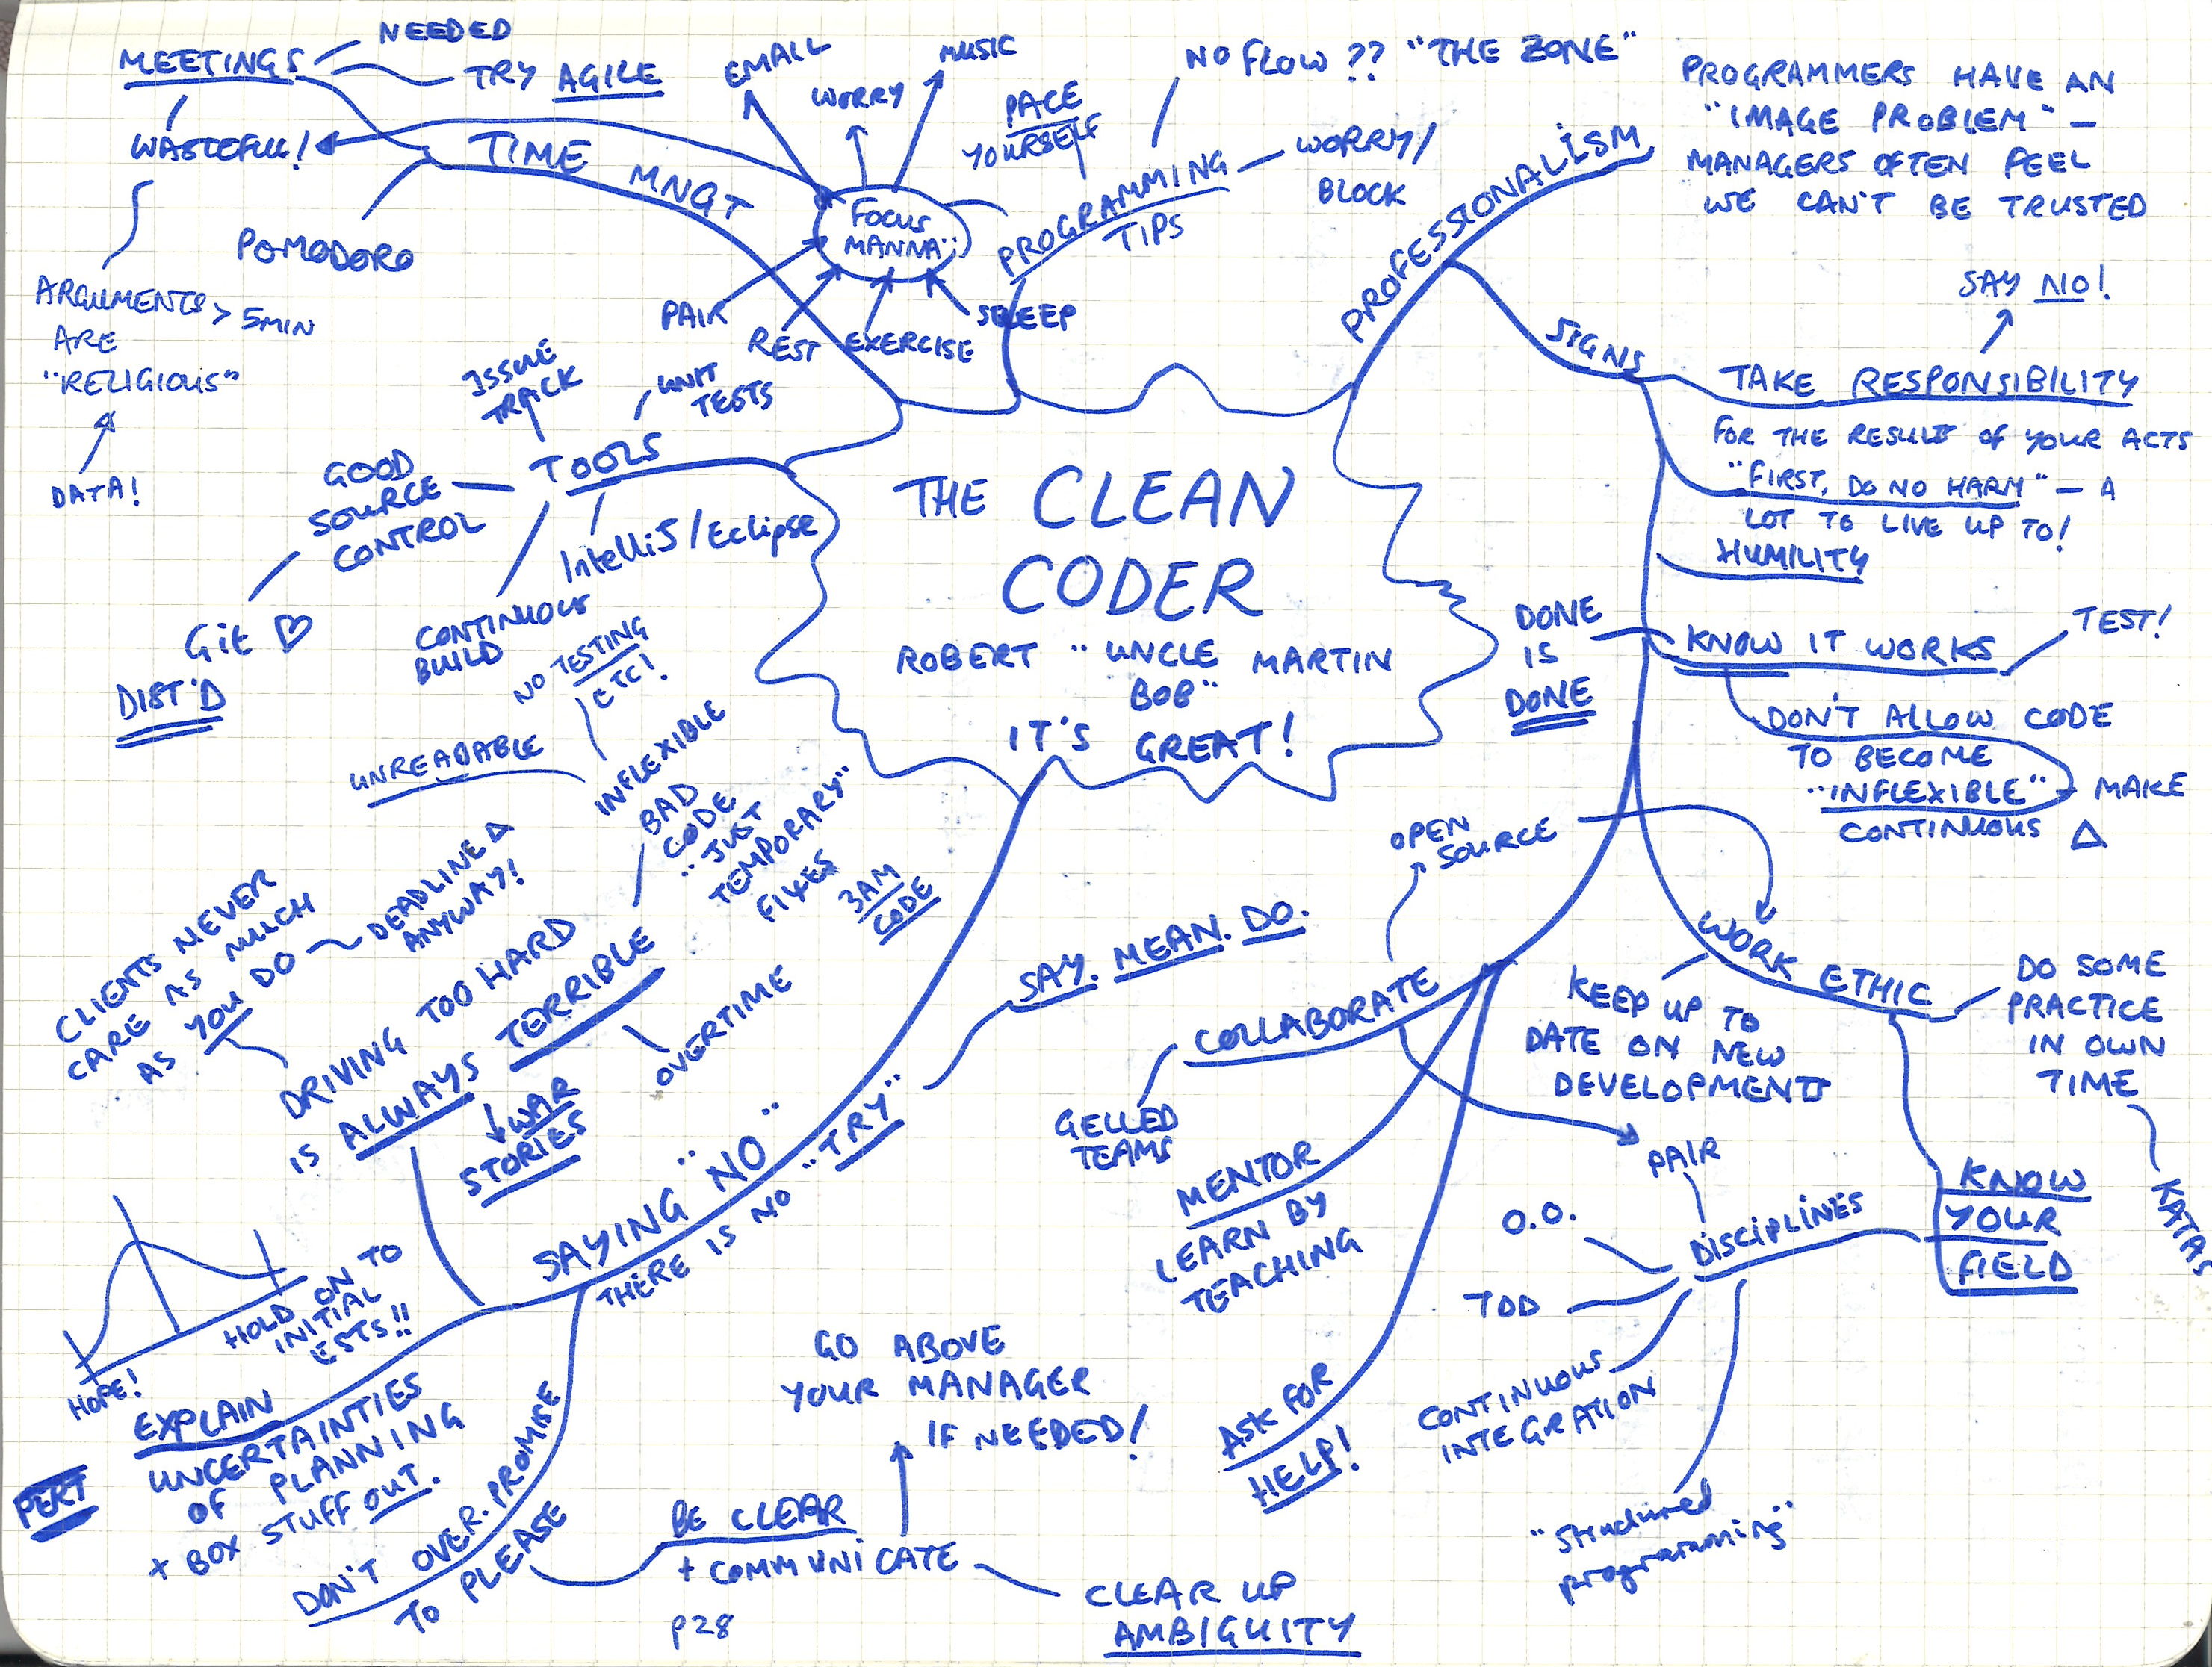 My mindmap of The Clean Coder